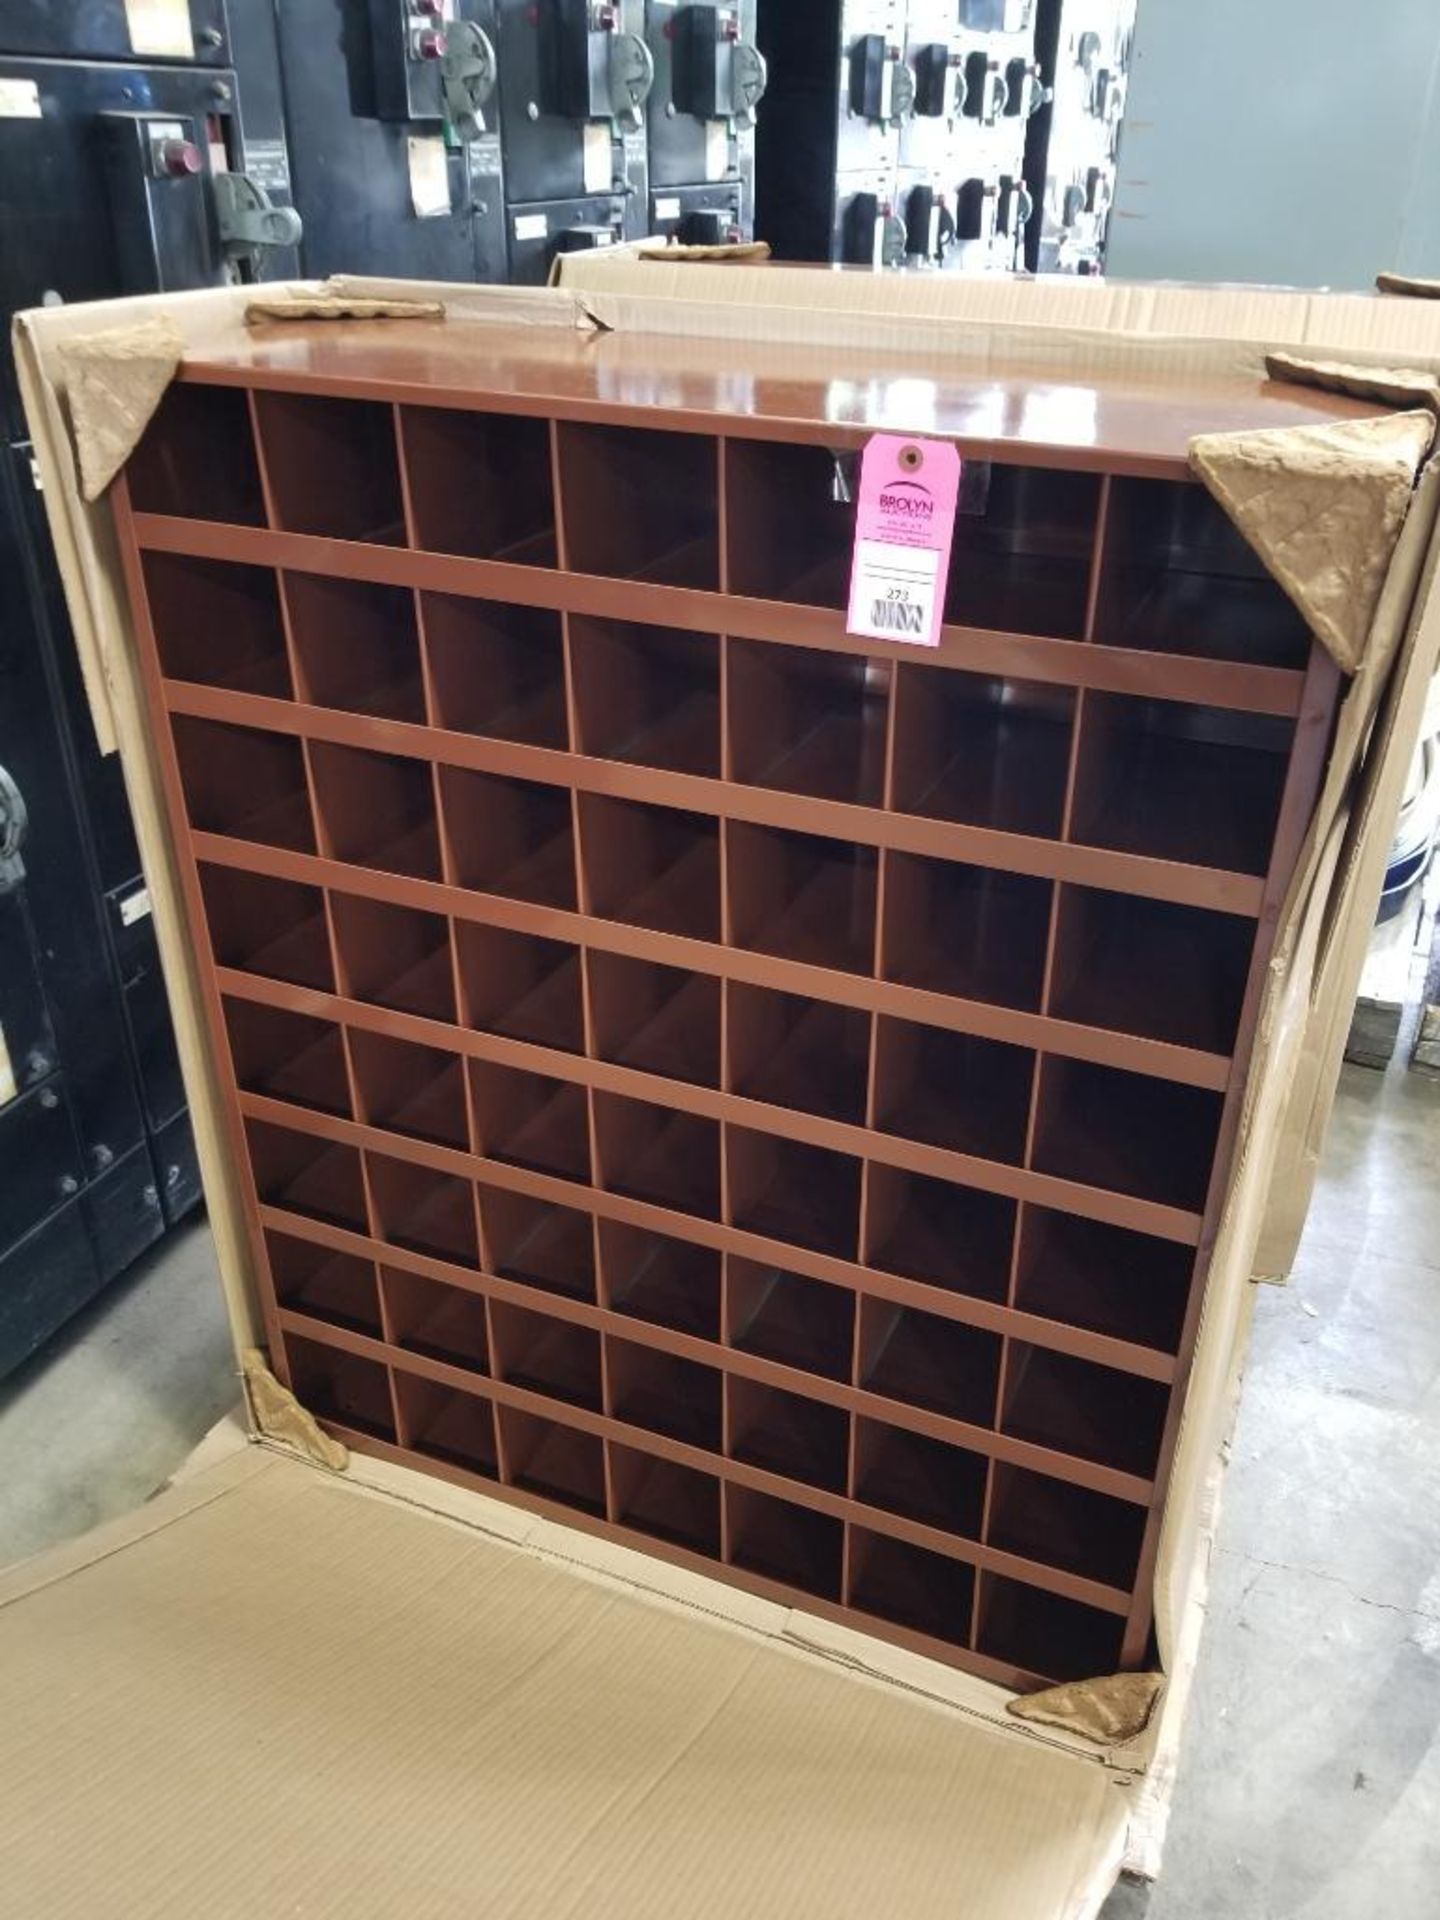 Metal pigeon hole cabinet. New in box.